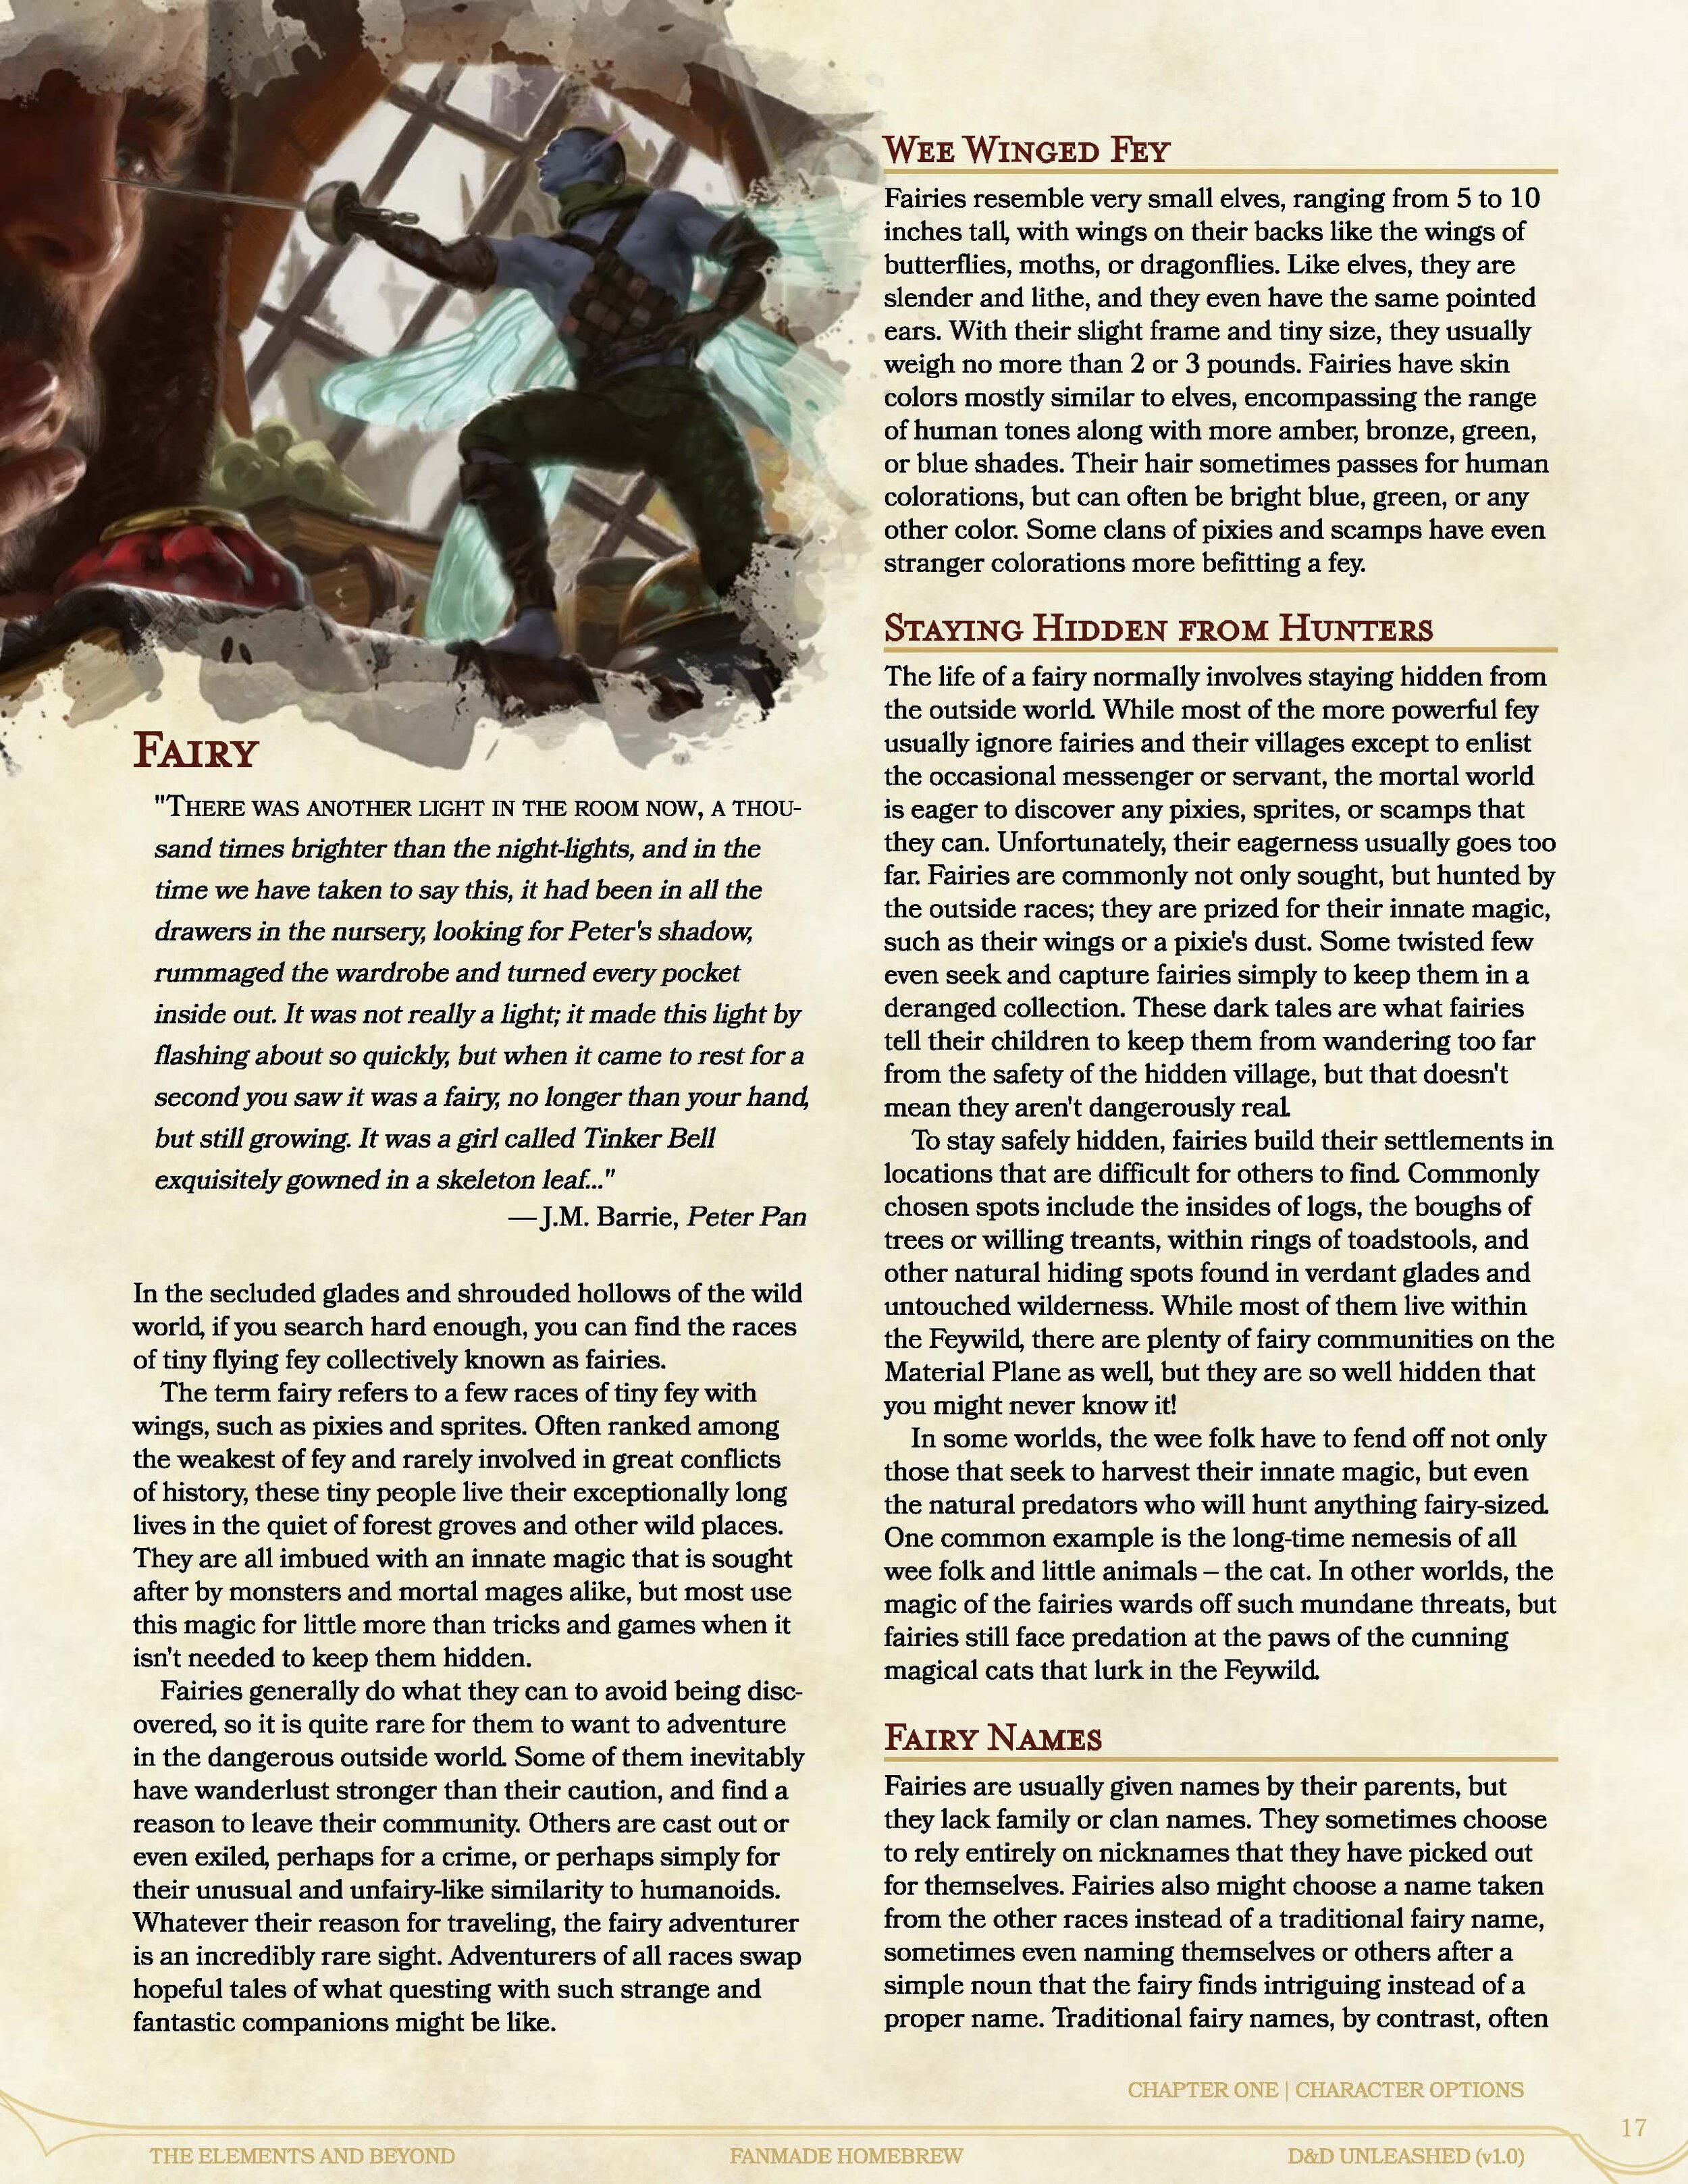 D&D Unleashed Compendium -- The Elements and Beyond (v1p0)_Page_017.jpg